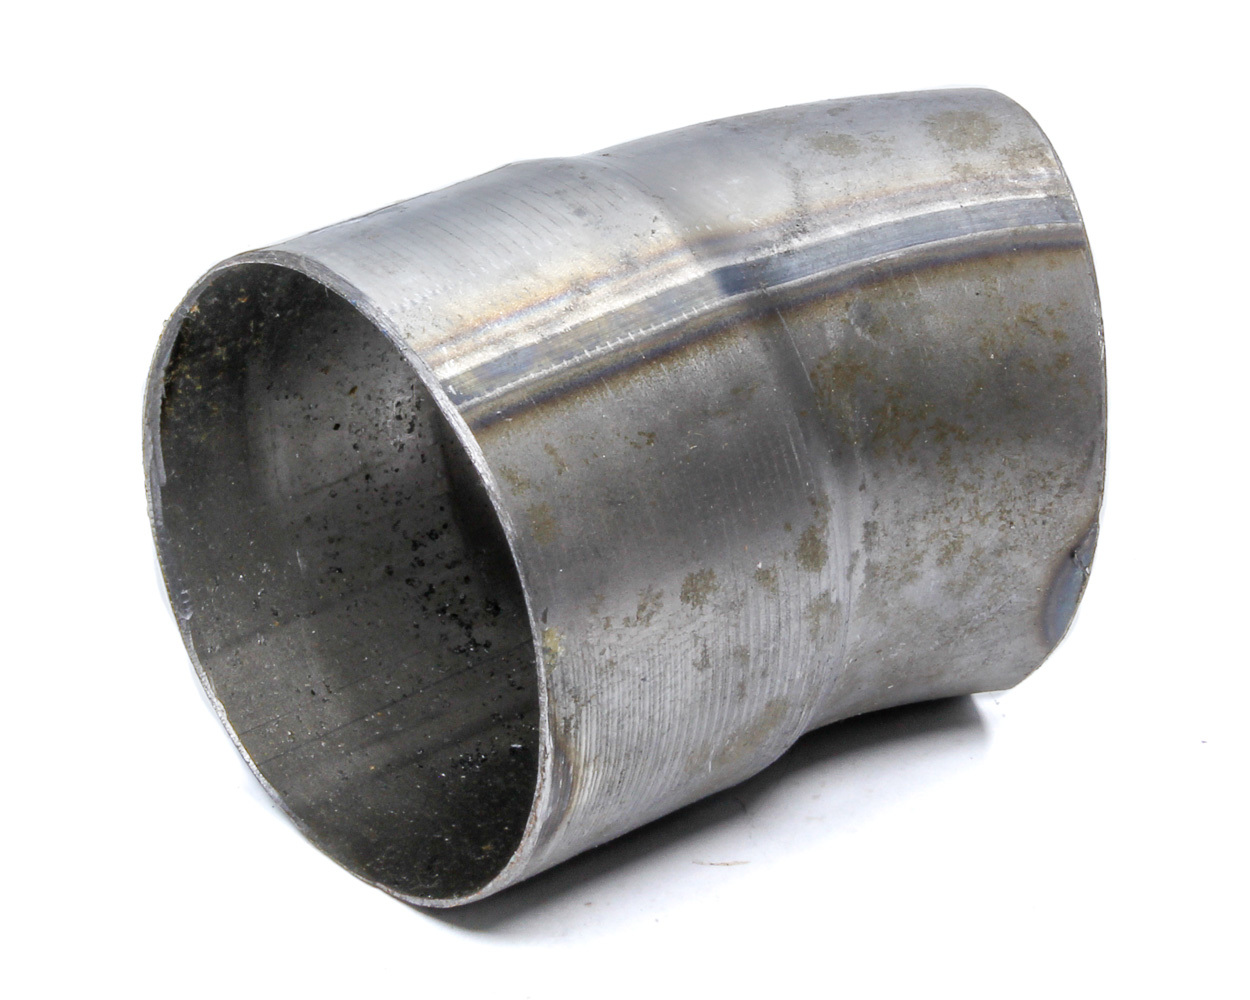 Schoenfeld Headers 3023 Exhaust Tip, Clamp-On, 3 in Inlet, 3 in Round Outlet, 4-1/4 in Long, Single Wall, Cut Edge, Angled Cut, Turnout Style, Steel, Natural, Each